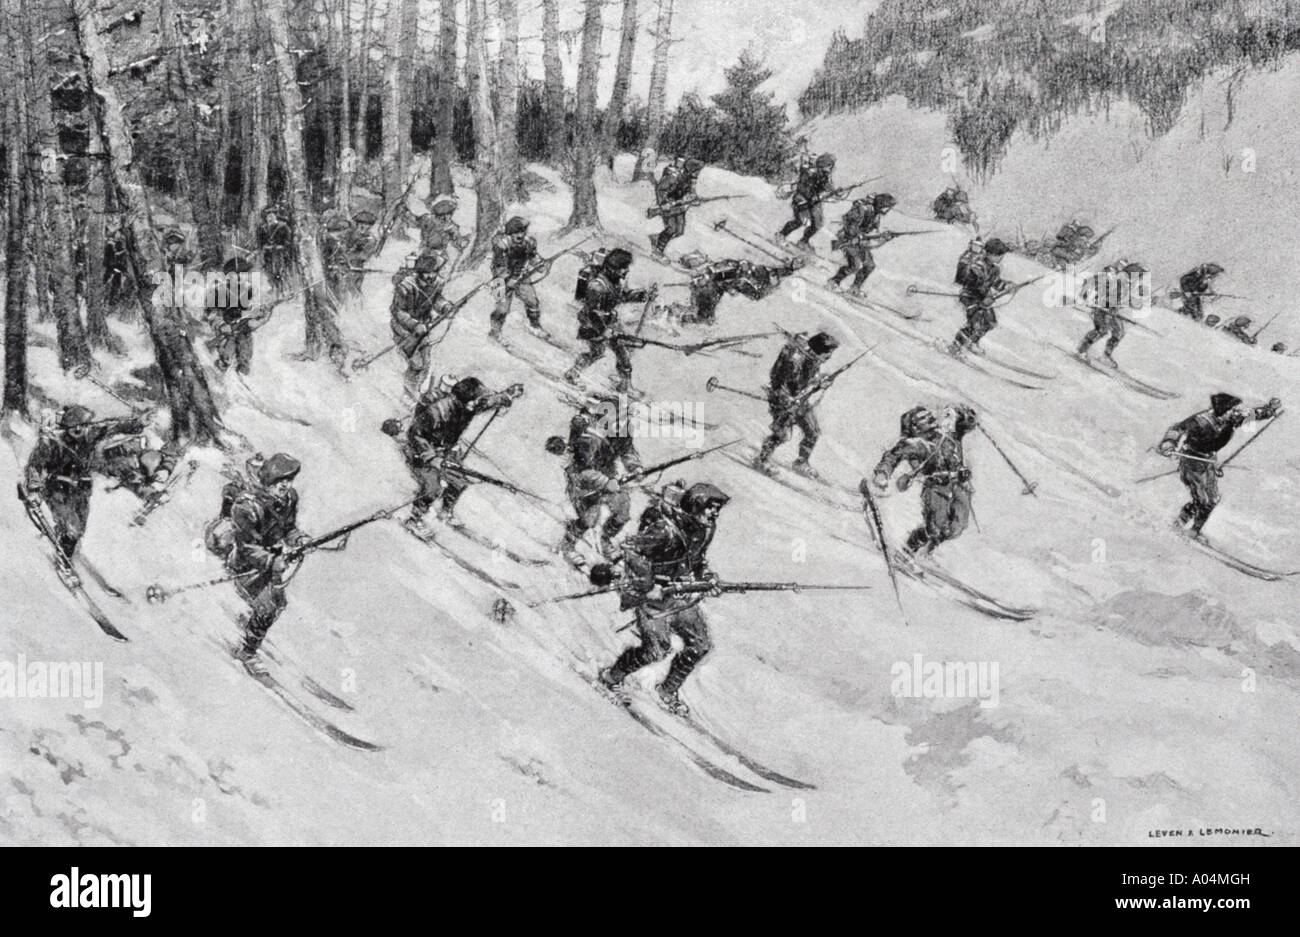 French Alpine troops attacking on skis during World War One. from L'Illustration magazine, 1915. Artist Lever Lemonier. Stock Photo